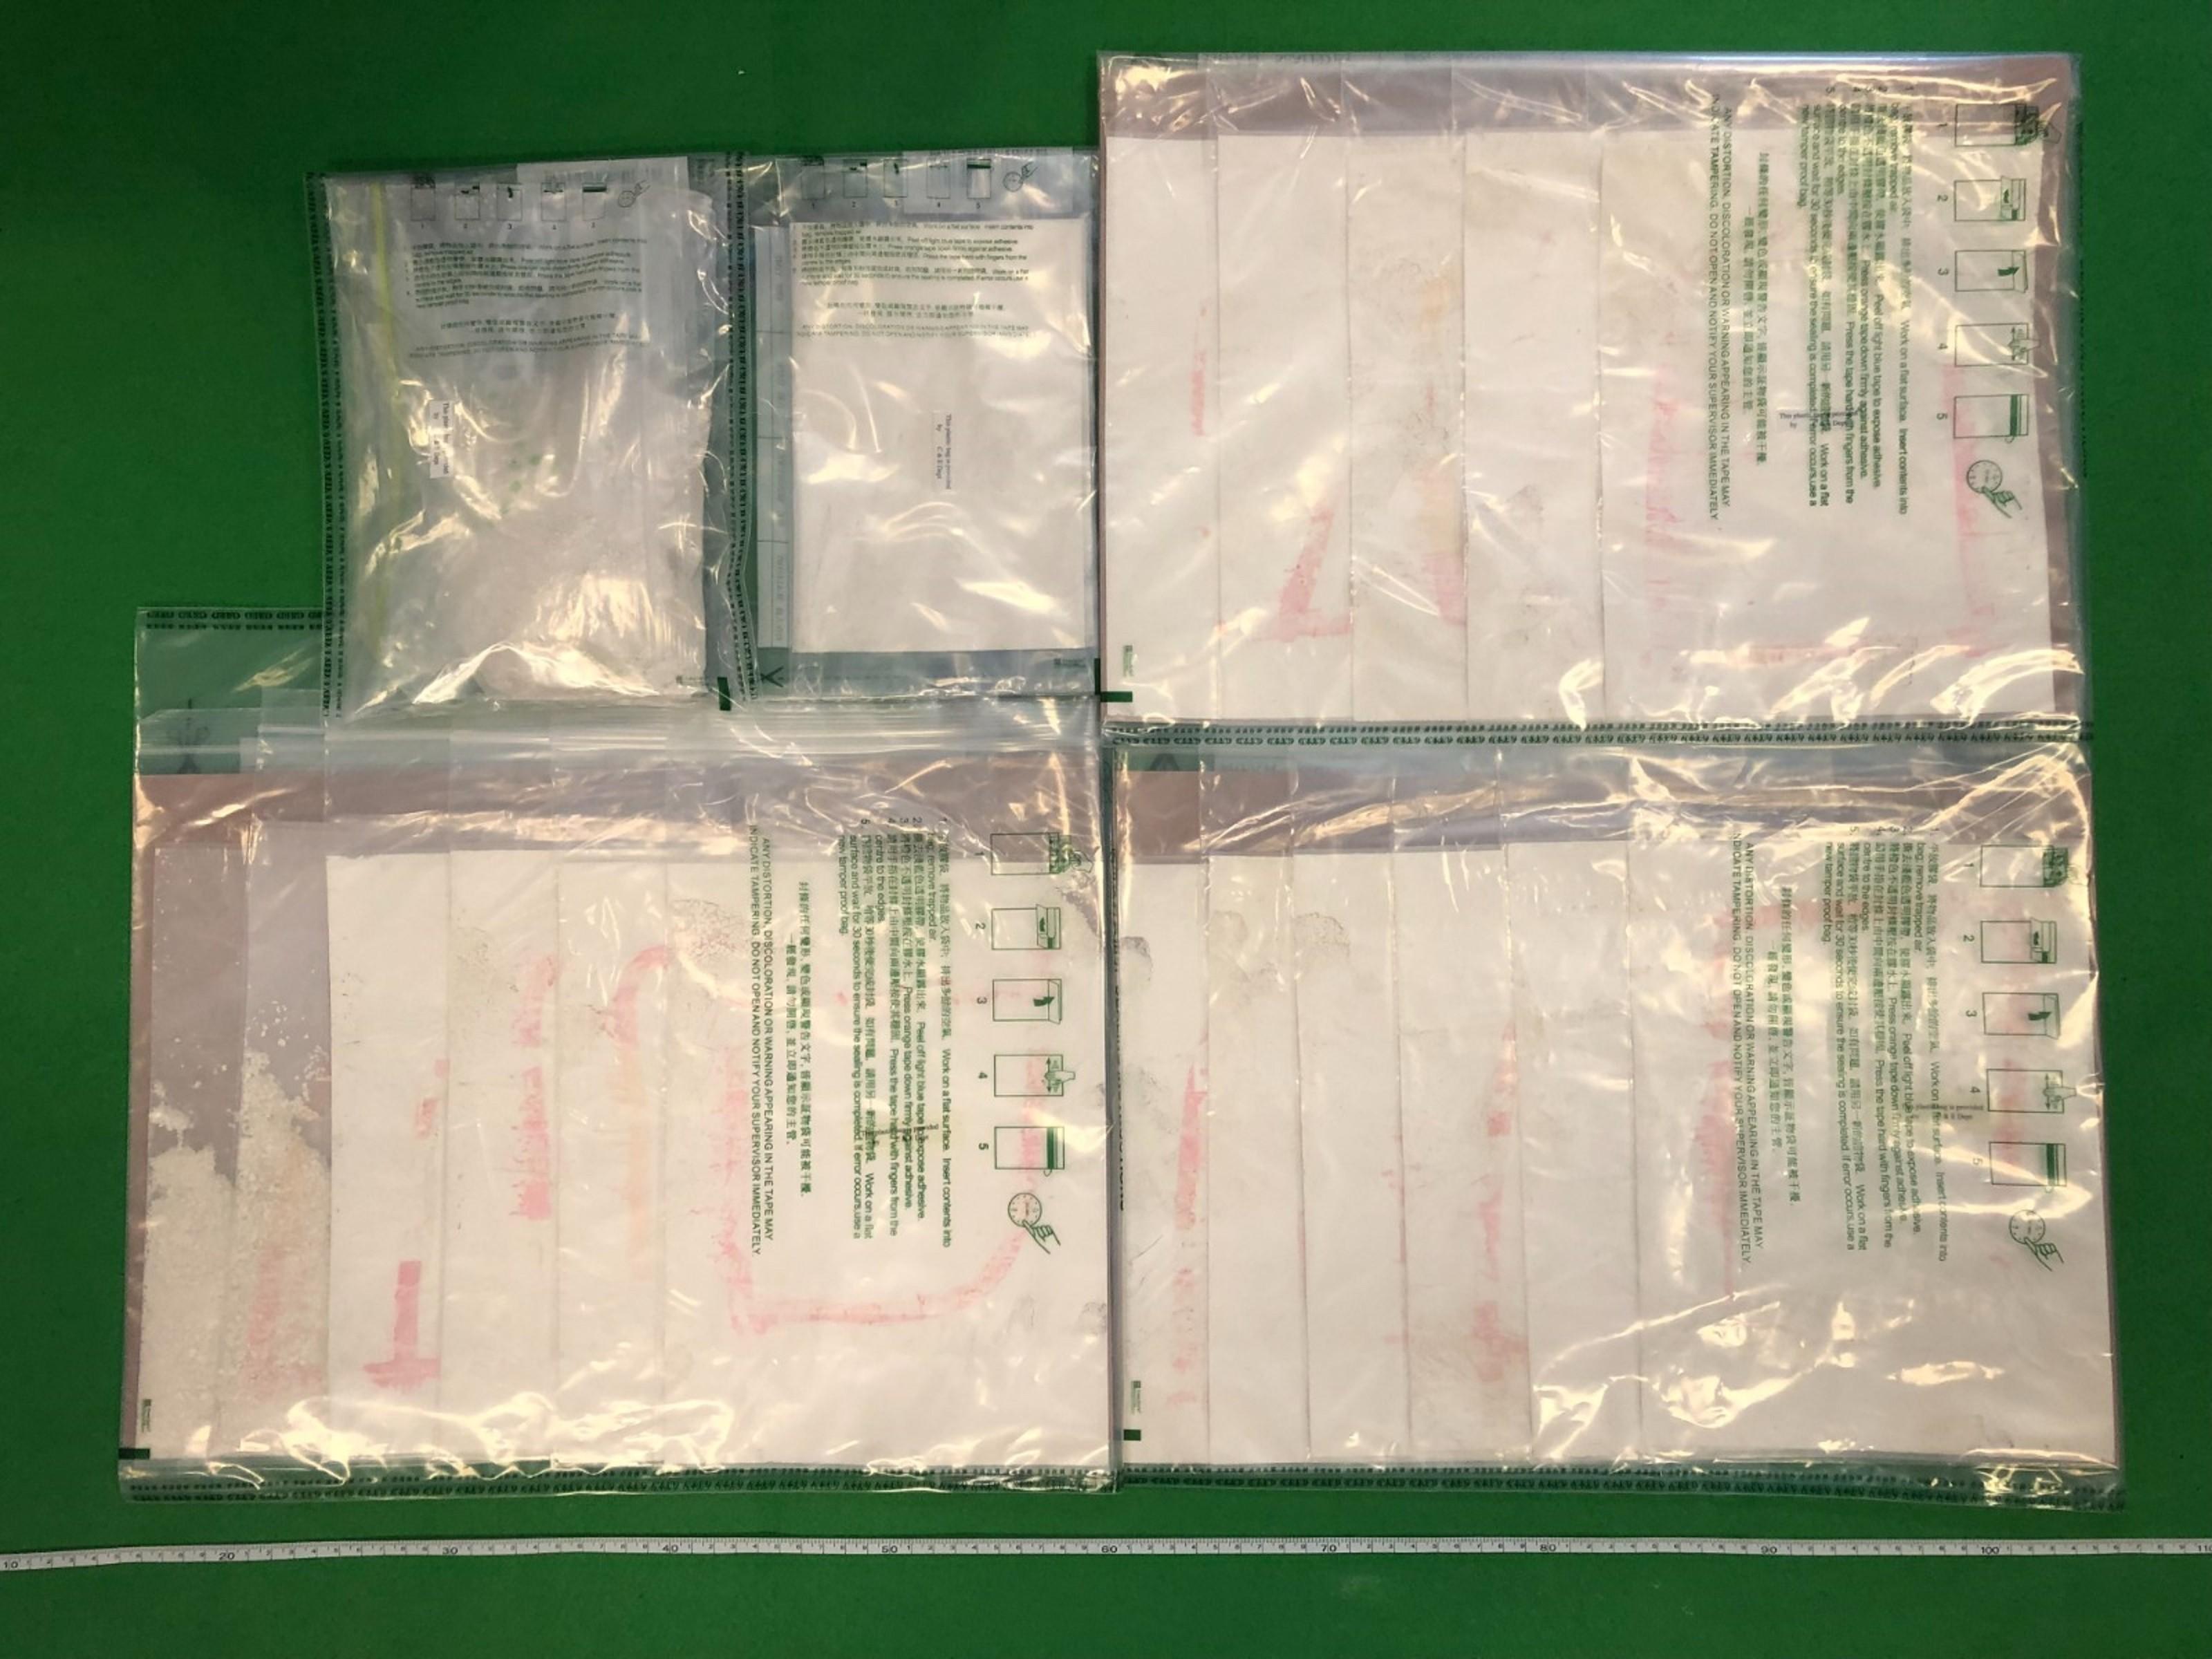 Hong Kong Customs on August 9 and 15 and yesterday (September 7) seized about 12 kilograms of suspected methamphetamine and about 570 grams of suspected heroin, with an estimated market value of about $6.9 million and about $680,000 respectively, in Hong Kong International Airport, Tuen Mun, Kwai Chung, Mong Kok and San Po Kong. Photo shows the suspected heroin seized by Customs officers in San Po Kong.